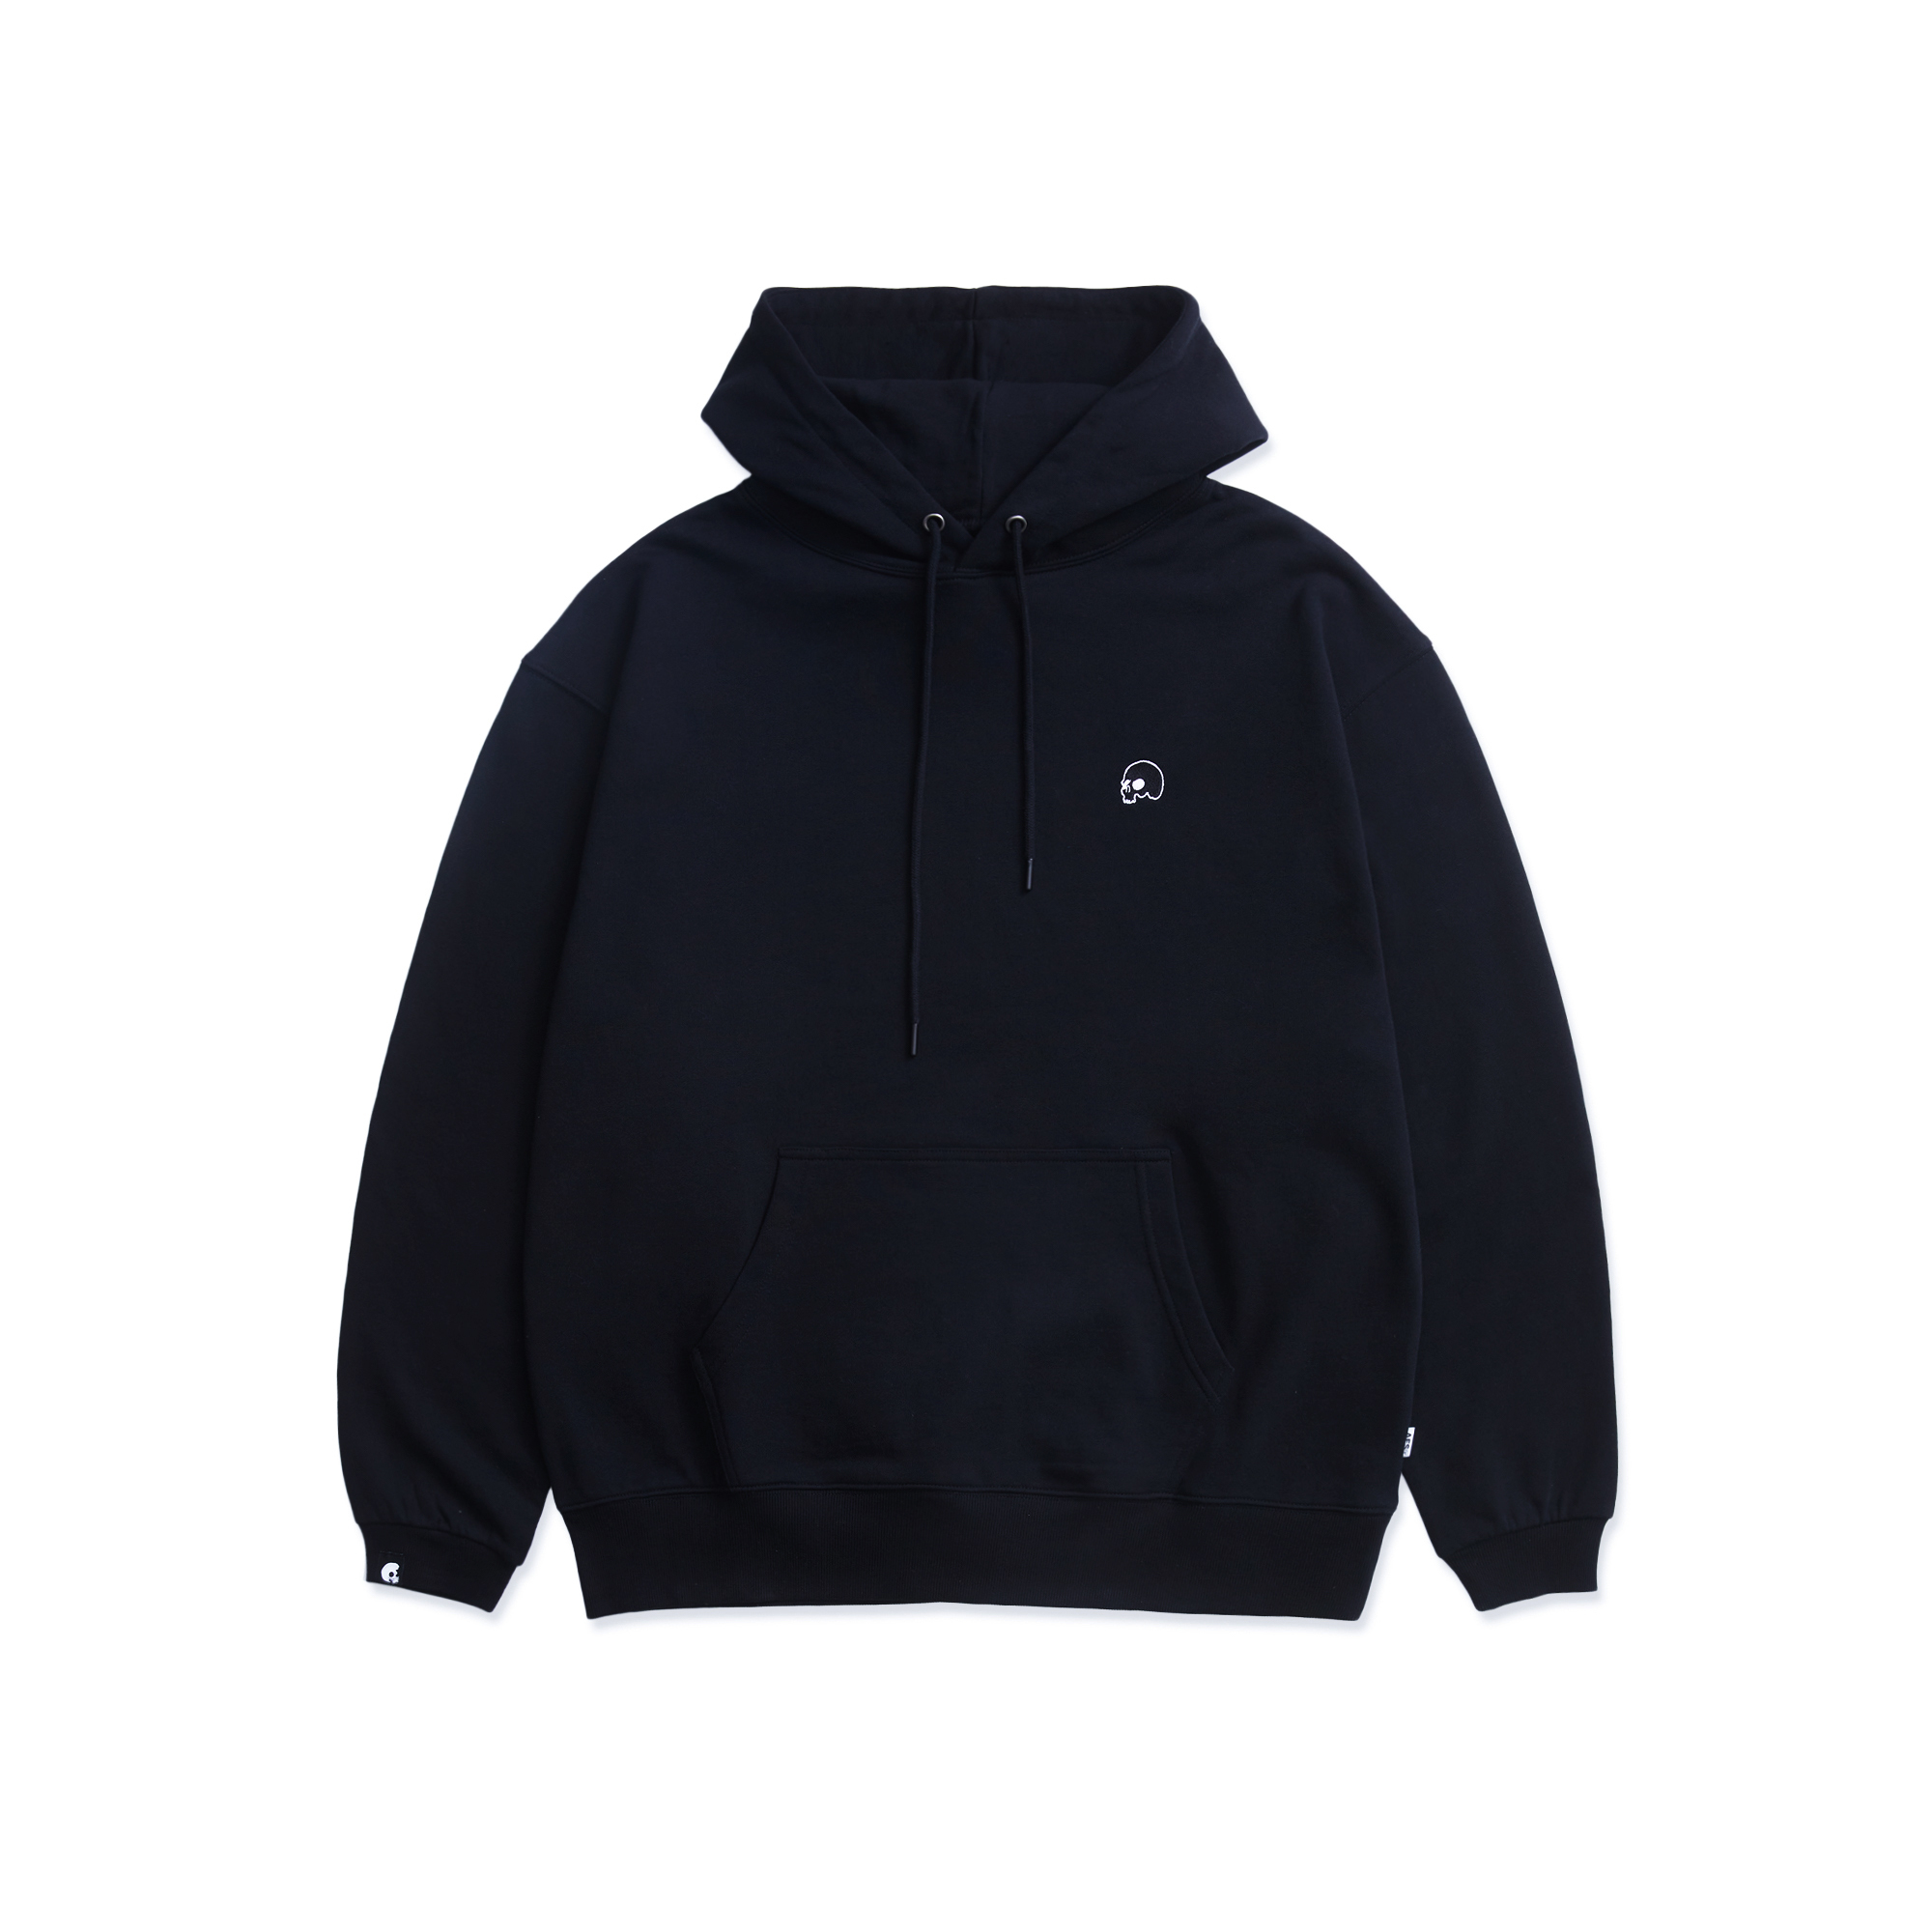 AES SKULL LOGO EMBROIDERED HOODIE